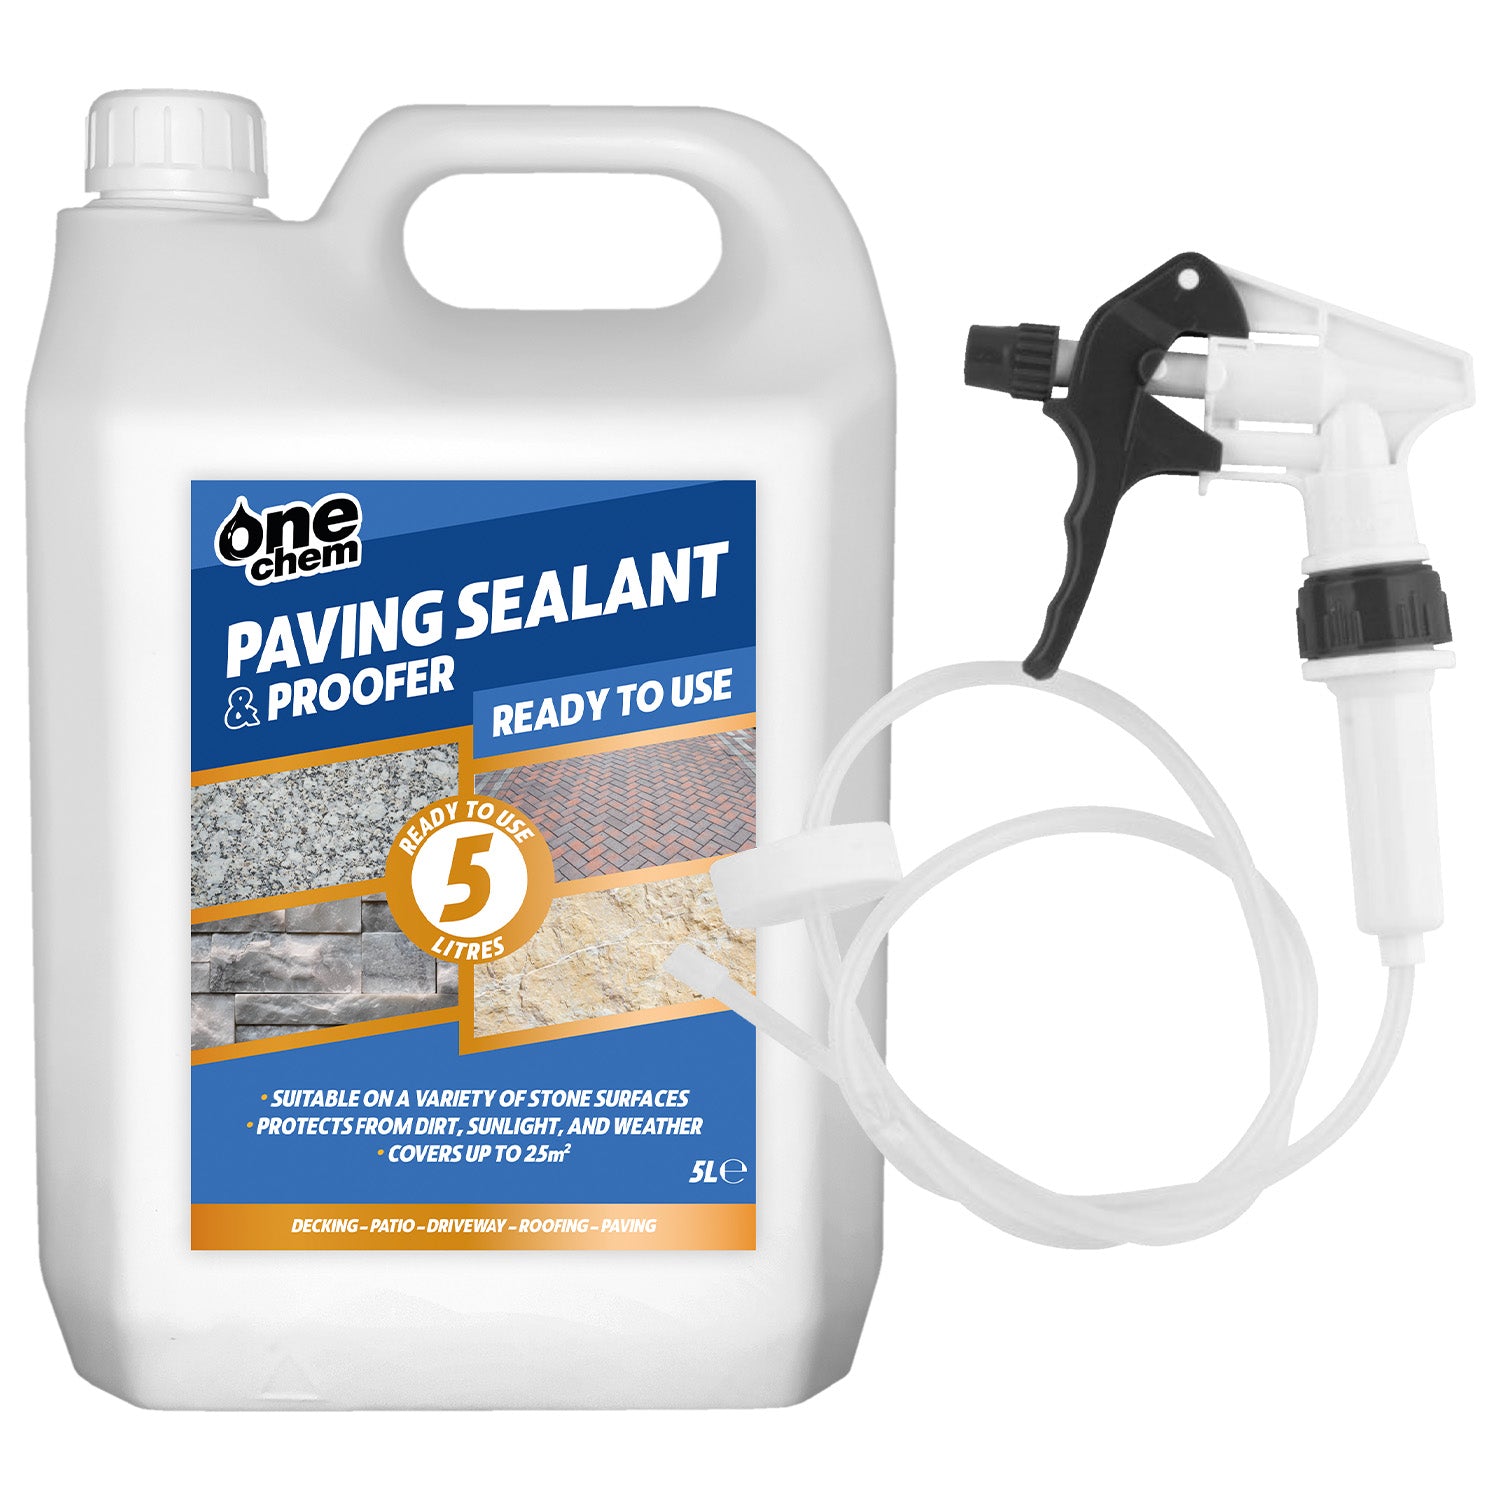 One Chem - Paving Sealant and Proofer 5 Litre Water Seal with Long Hose Trigger